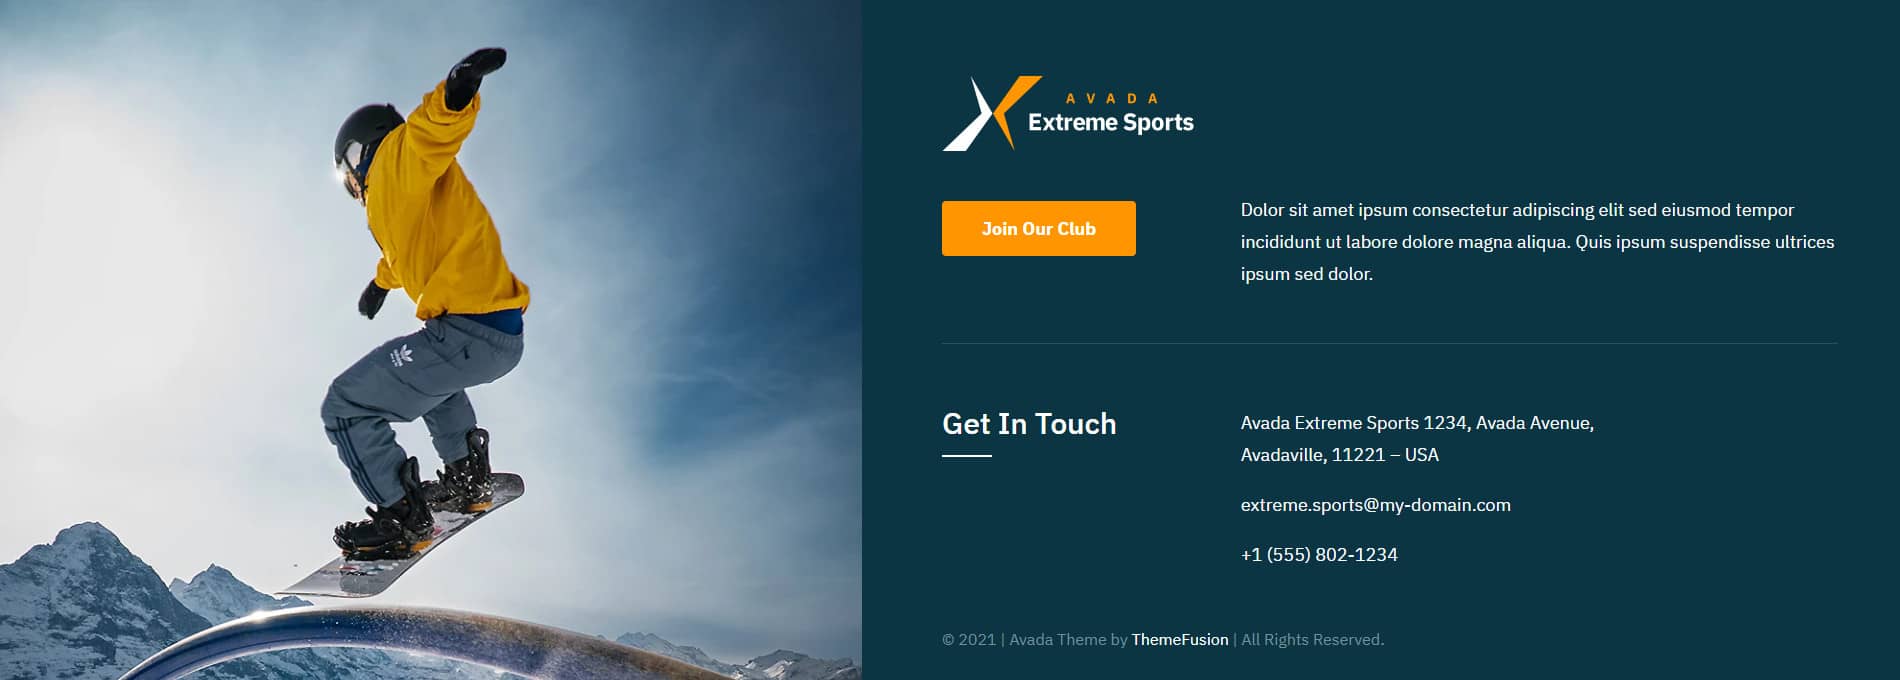 Avada Extreme Sports Footer